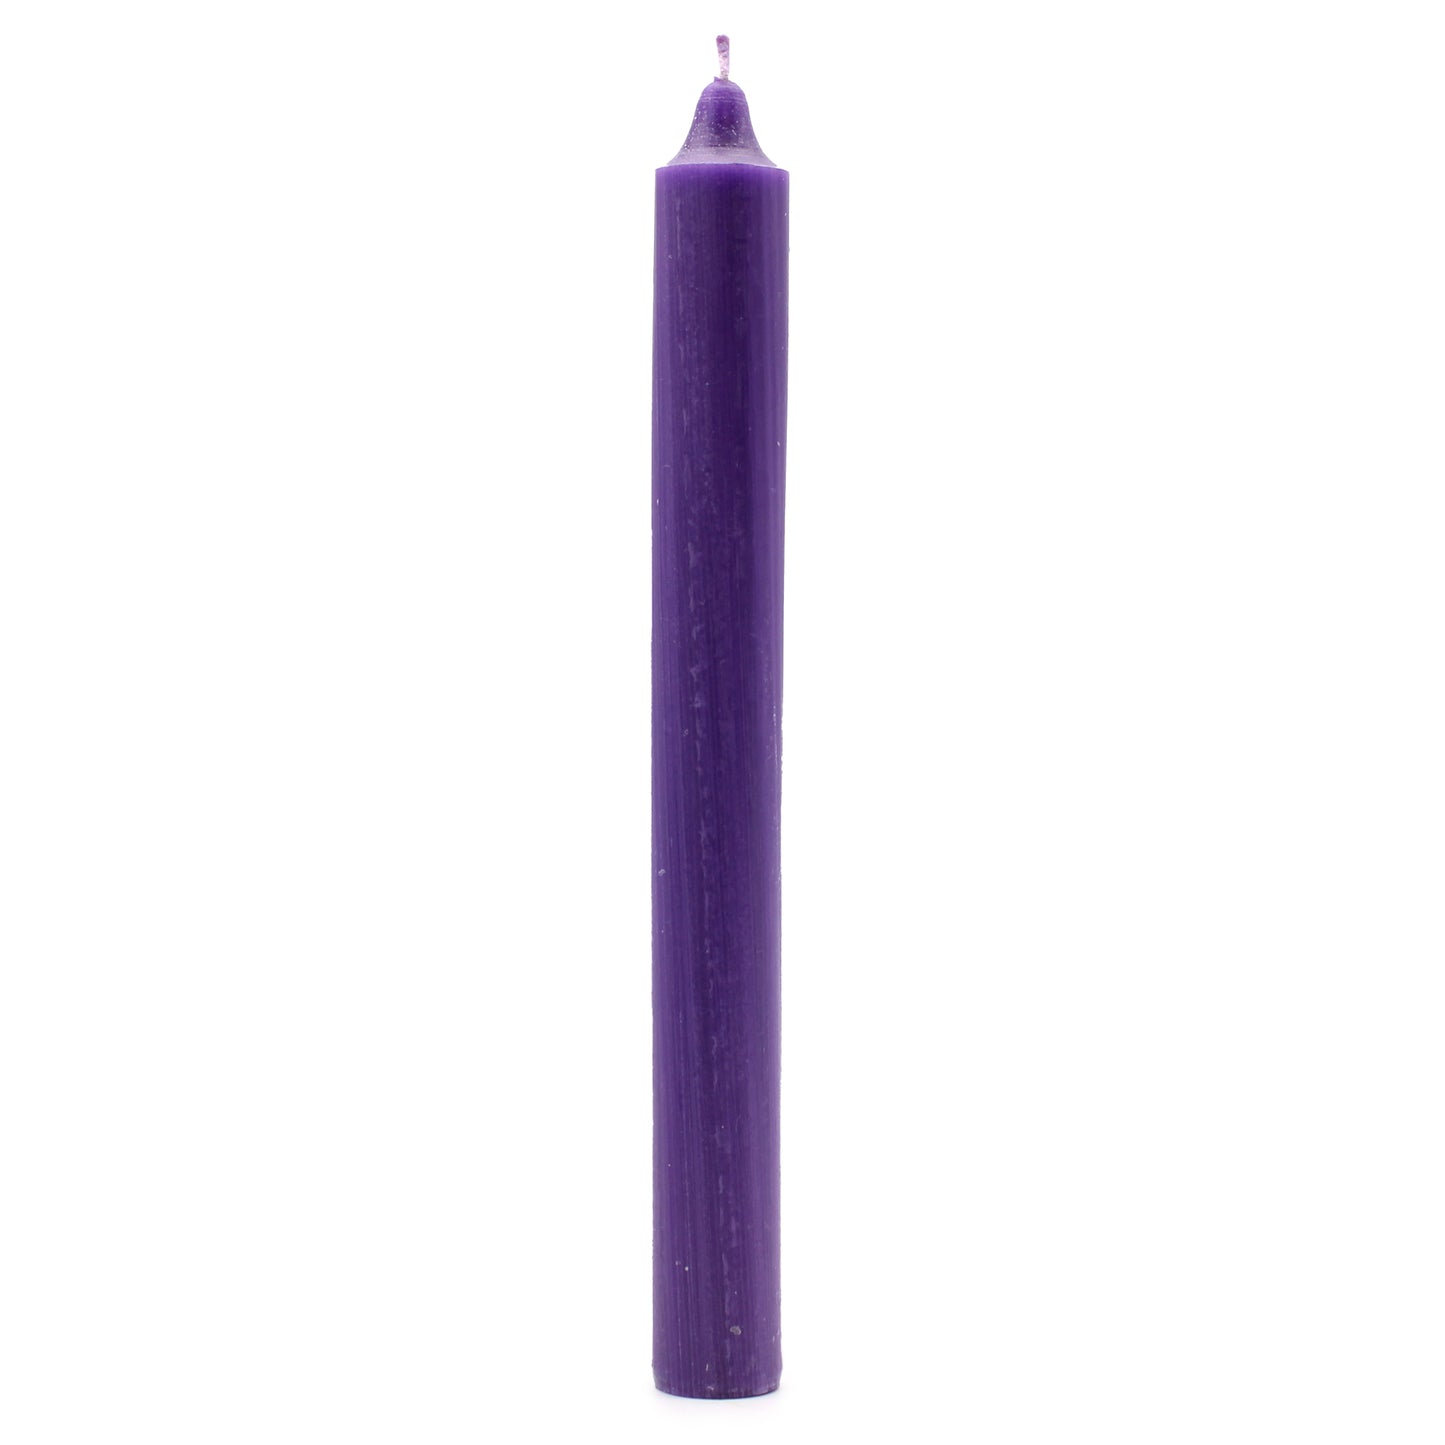 Solid Colour Dinner Candles - Rustic Purple - Pack of 5